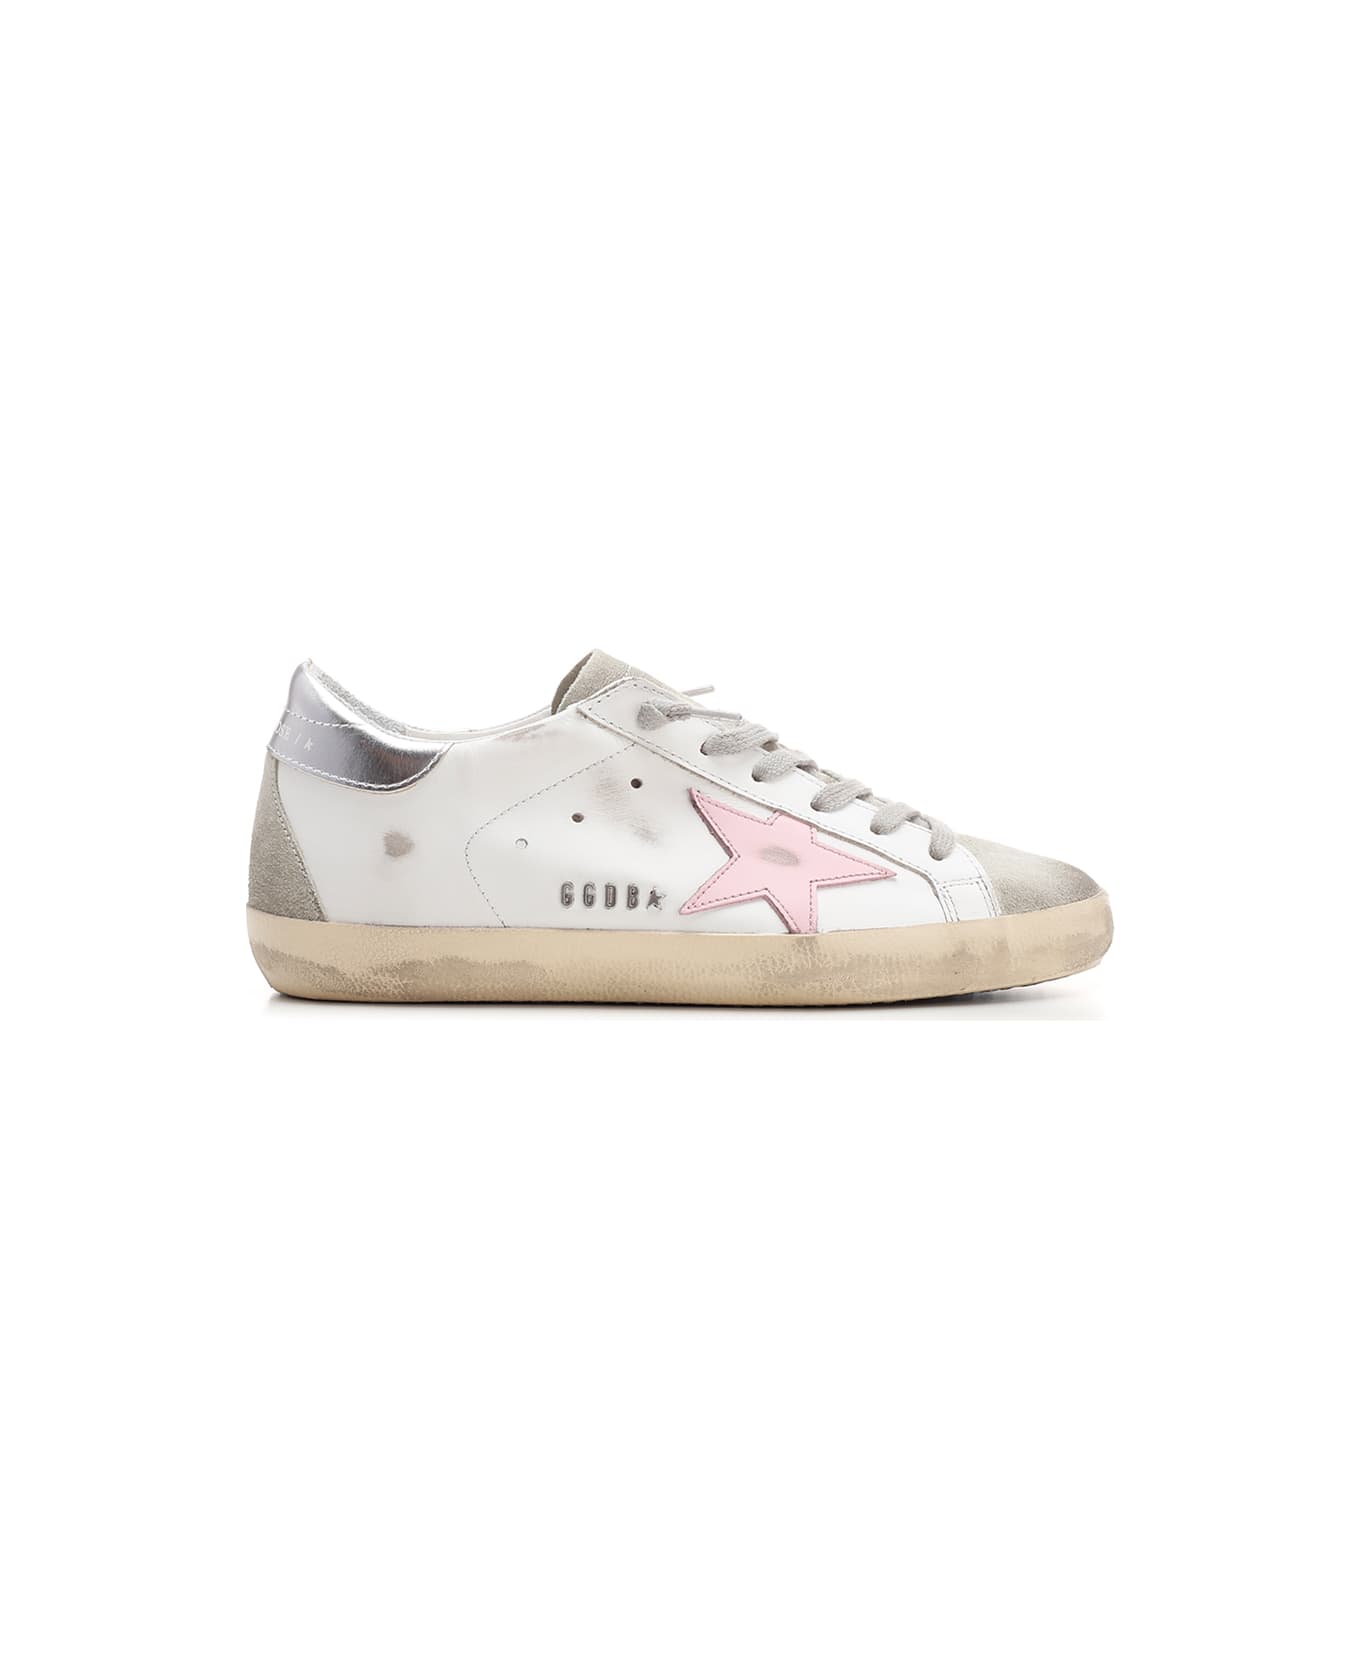 Golden Goose Super-star Leather Upper And Star Suede Toe And Spur Laminated Heel Metal Lettering - White/Ice/Orchid Pink/Silver スニーカー